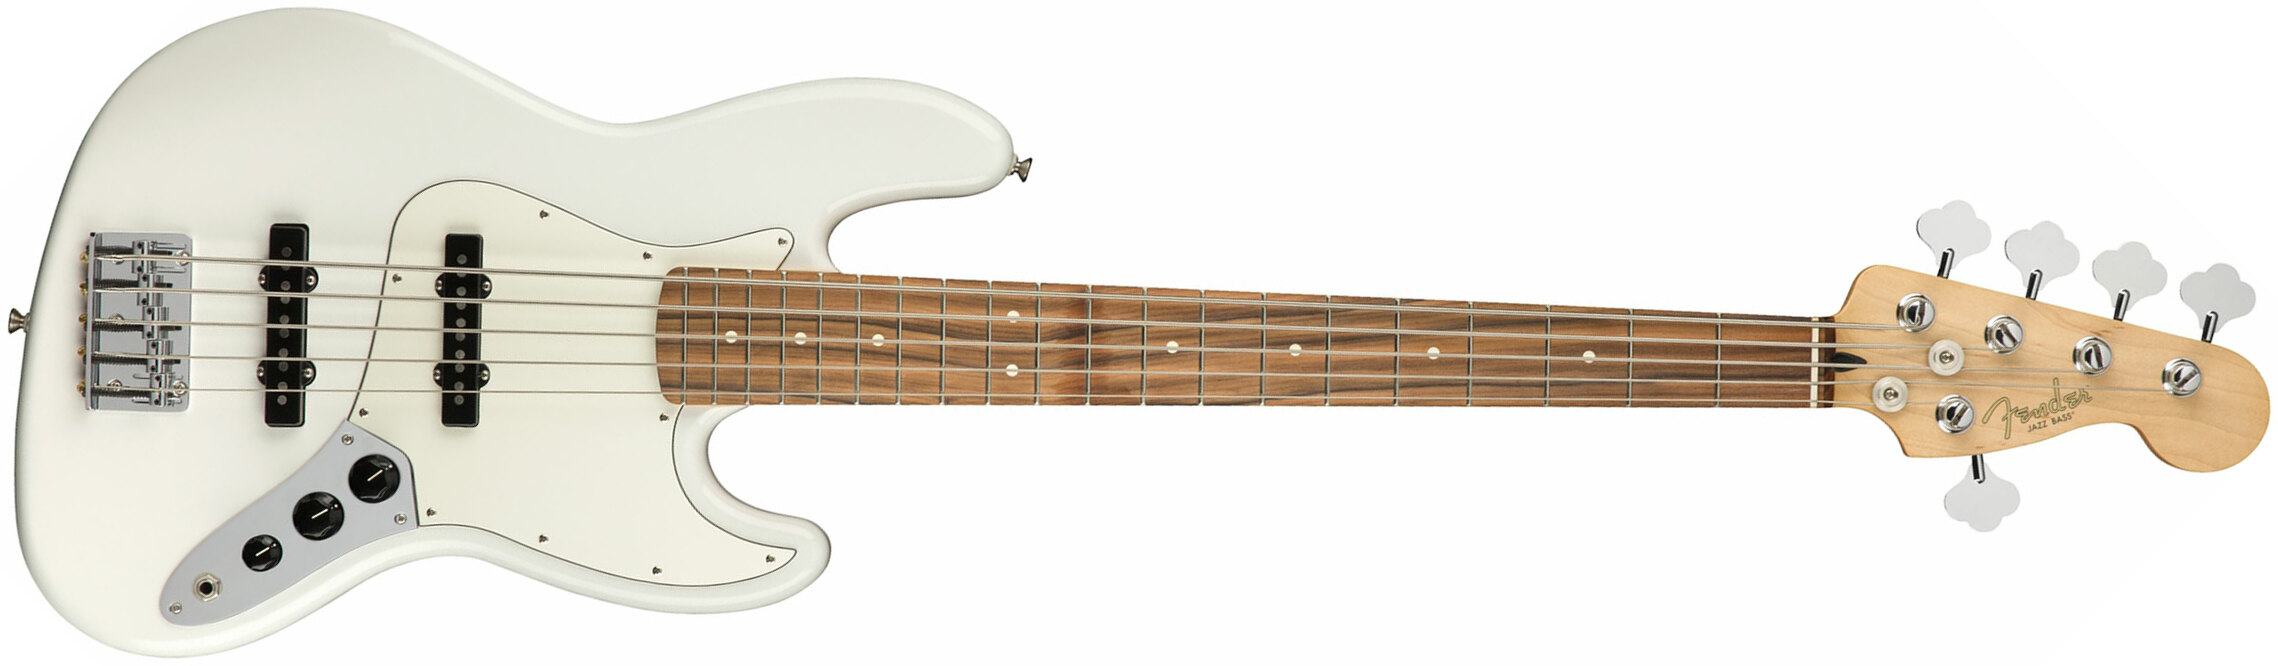 Fender Jazz Bass Player V 5-cordes Mex Pf - Polar White - Solid body electric bass - Main picture